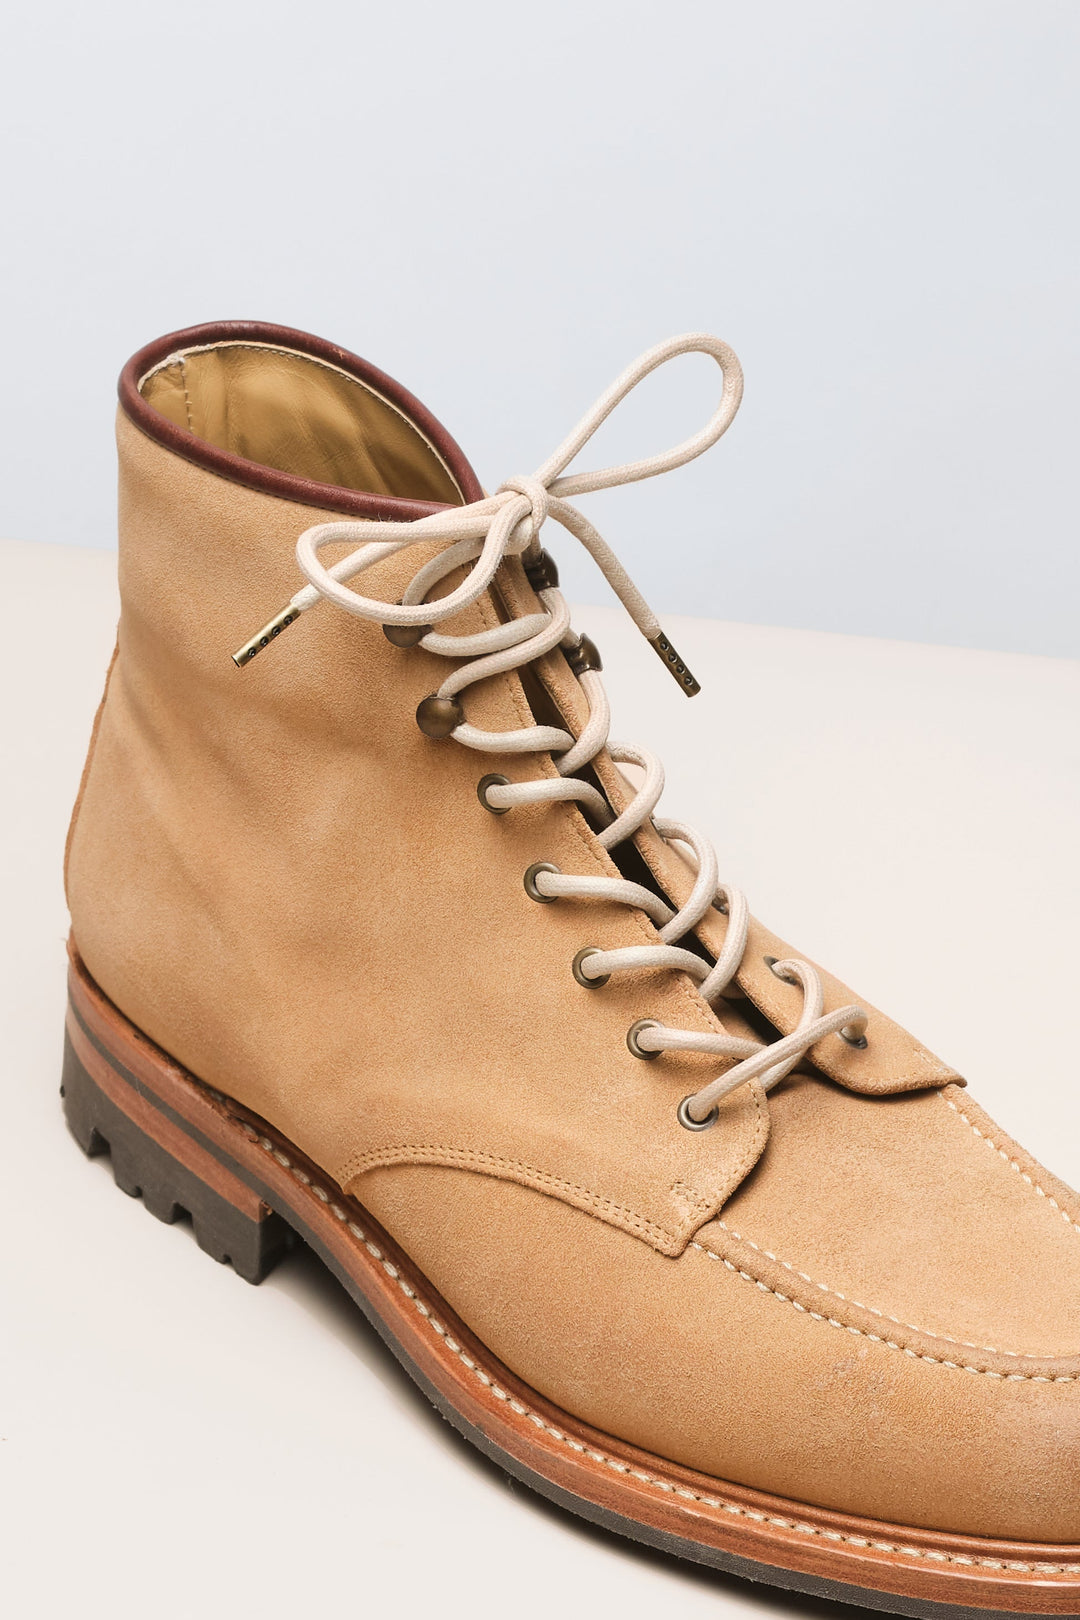 Cream Boot Laces - Round waxed boot laces with a diameter of 4mm. Available in 51 colors - Senkels